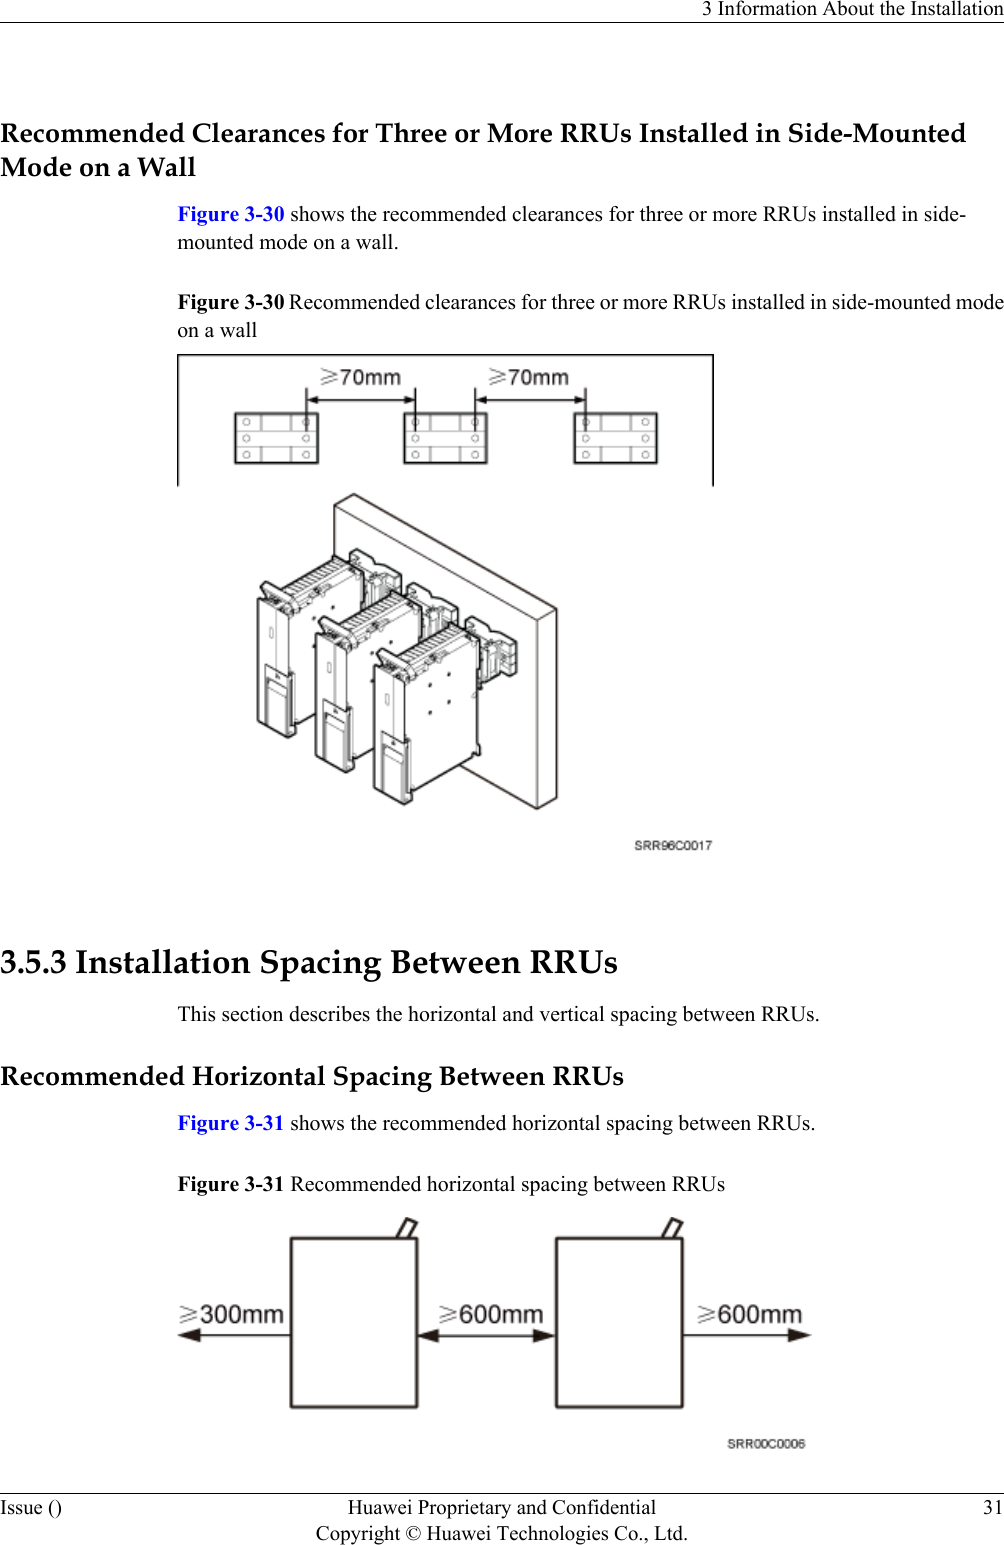  Recommended Clearances for Three or More RRUs Installed in Side-MountedMode on a WallFigure 3-30 shows the recommended clearances for three or more RRUs installed in side-mounted mode on a wall.Figure 3-30 Recommended clearances for three or more RRUs installed in side-mounted modeon a wall 3.5.3 Installation Spacing Between RRUsThis section describes the horizontal and vertical spacing between RRUs.Recommended Horizontal Spacing Between RRUsFigure 3-31 shows the recommended horizontal spacing between RRUs.Figure 3-31 Recommended horizontal spacing between RRUs3 Information About the InstallationIssue () Huawei Proprietary and ConfidentialCopyright © Huawei Technologies Co., Ltd.31